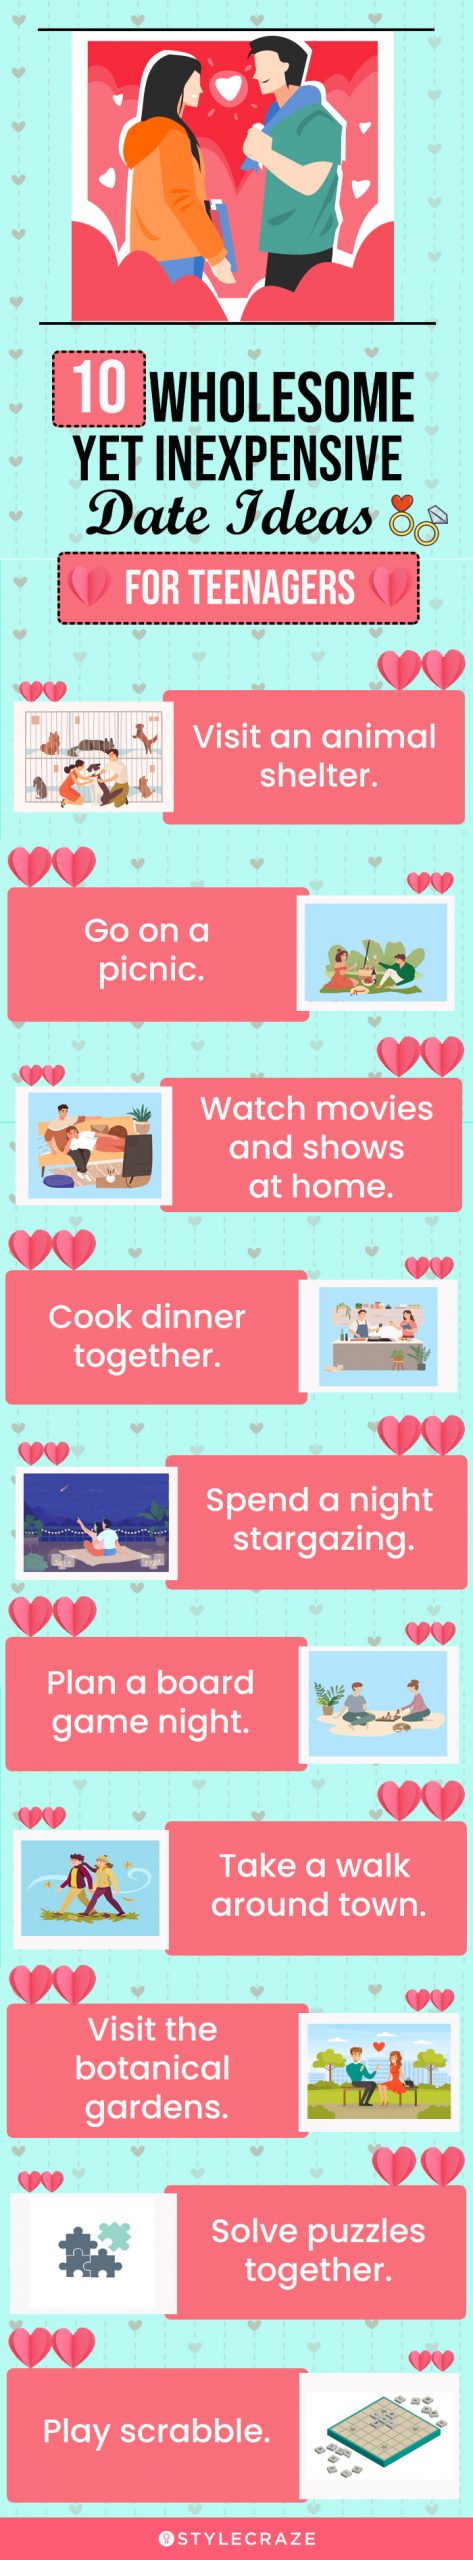 10 wholesome yet inexpensive date ideas (infographic)